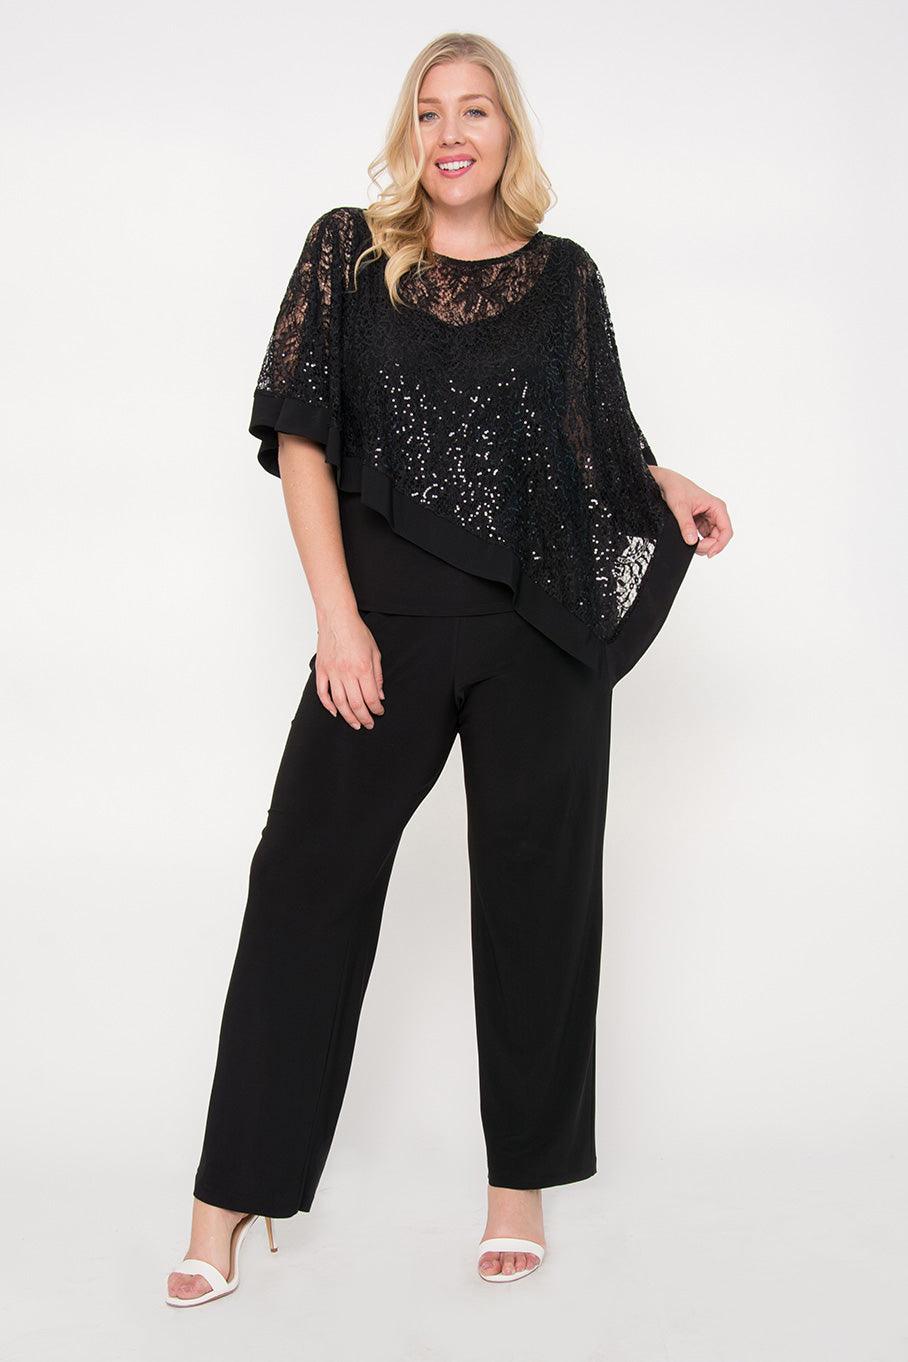 Navy R&M Richards 8998W Plus Size Formal Pants Suit for $79.99, – The Dress  Outlet